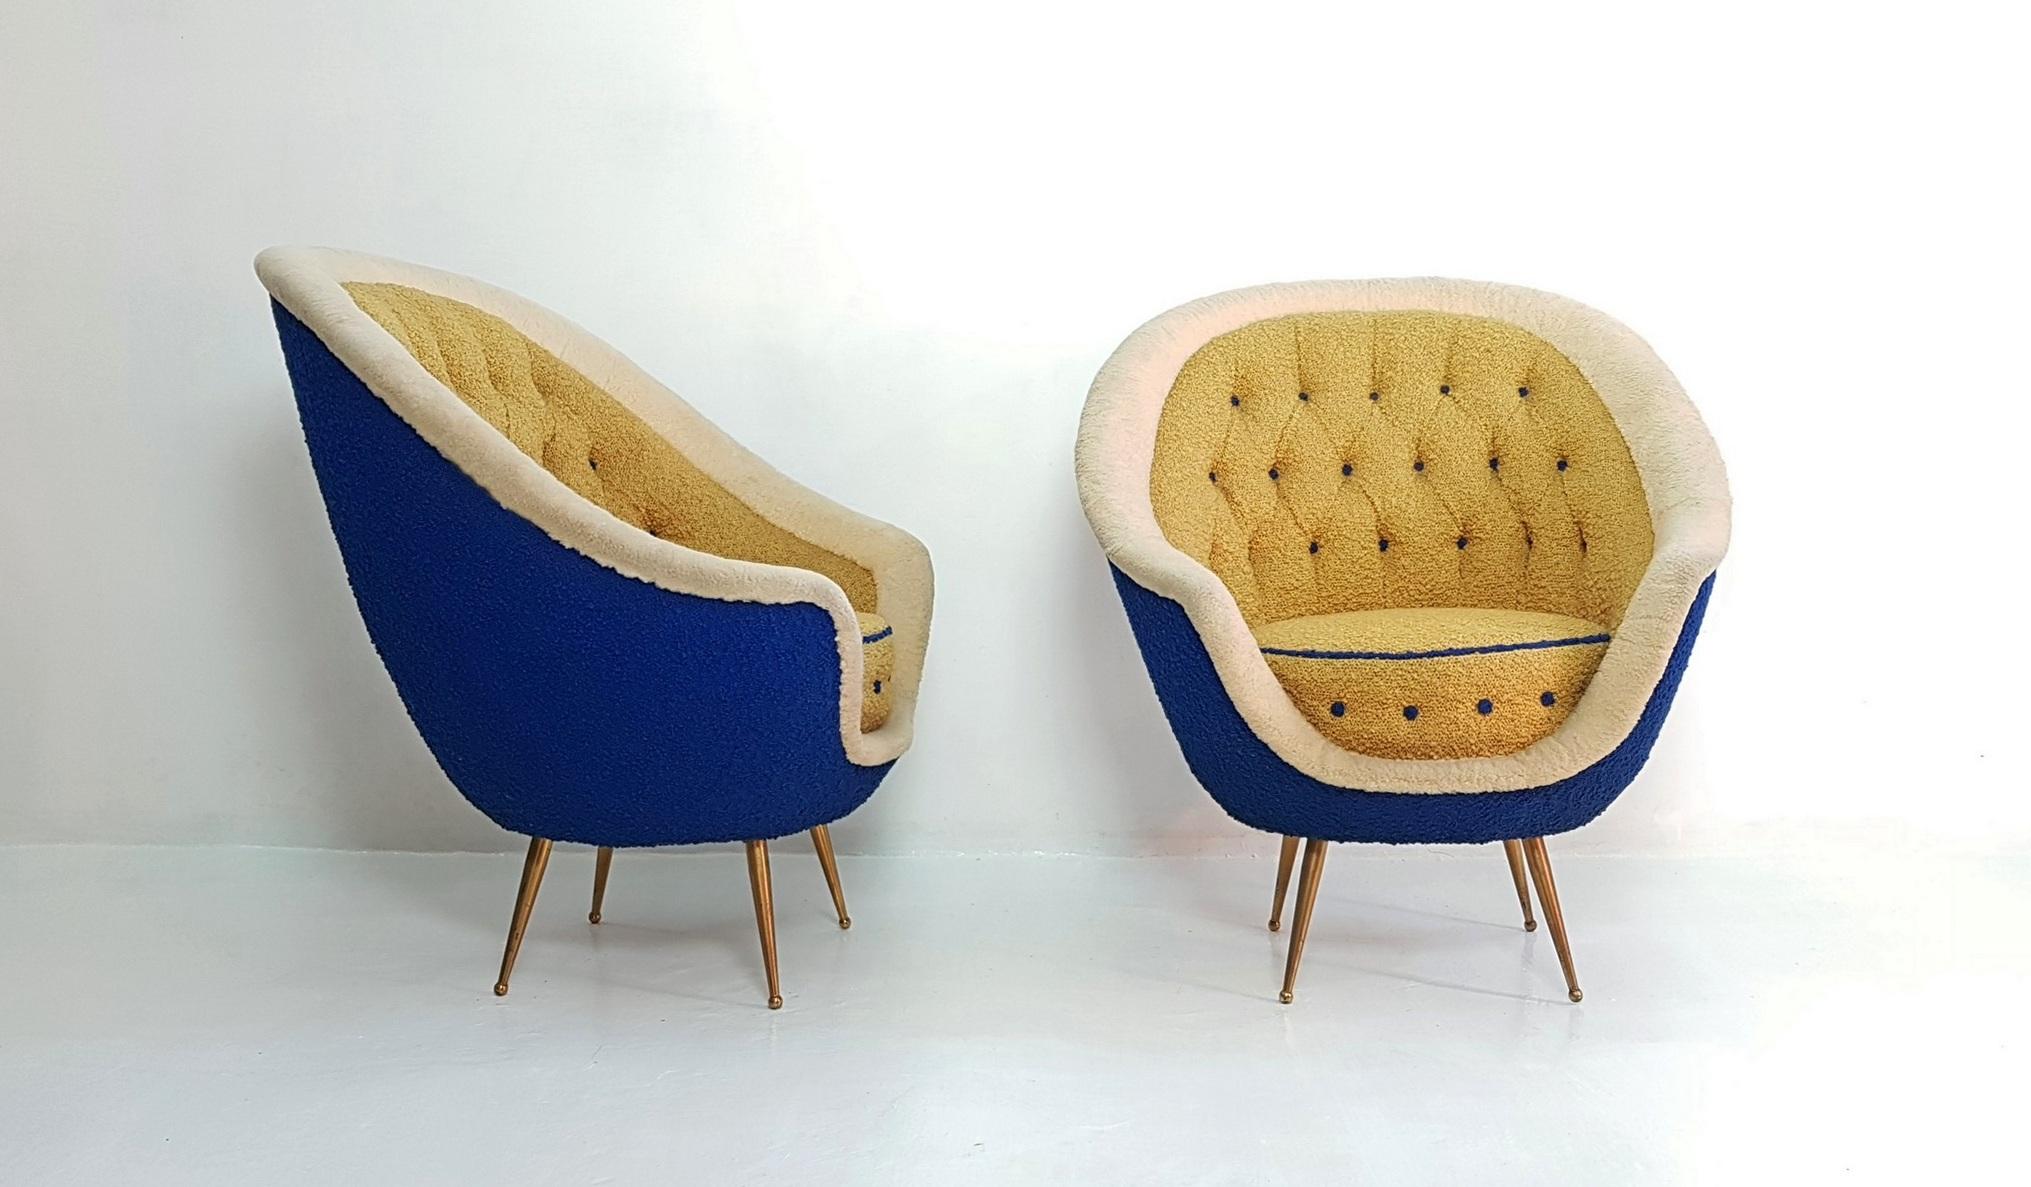 Mid-Century Modern Midcentury Pair of Armchairs with Brass Spider Legs by ISA Bergamo, Italy, 1959